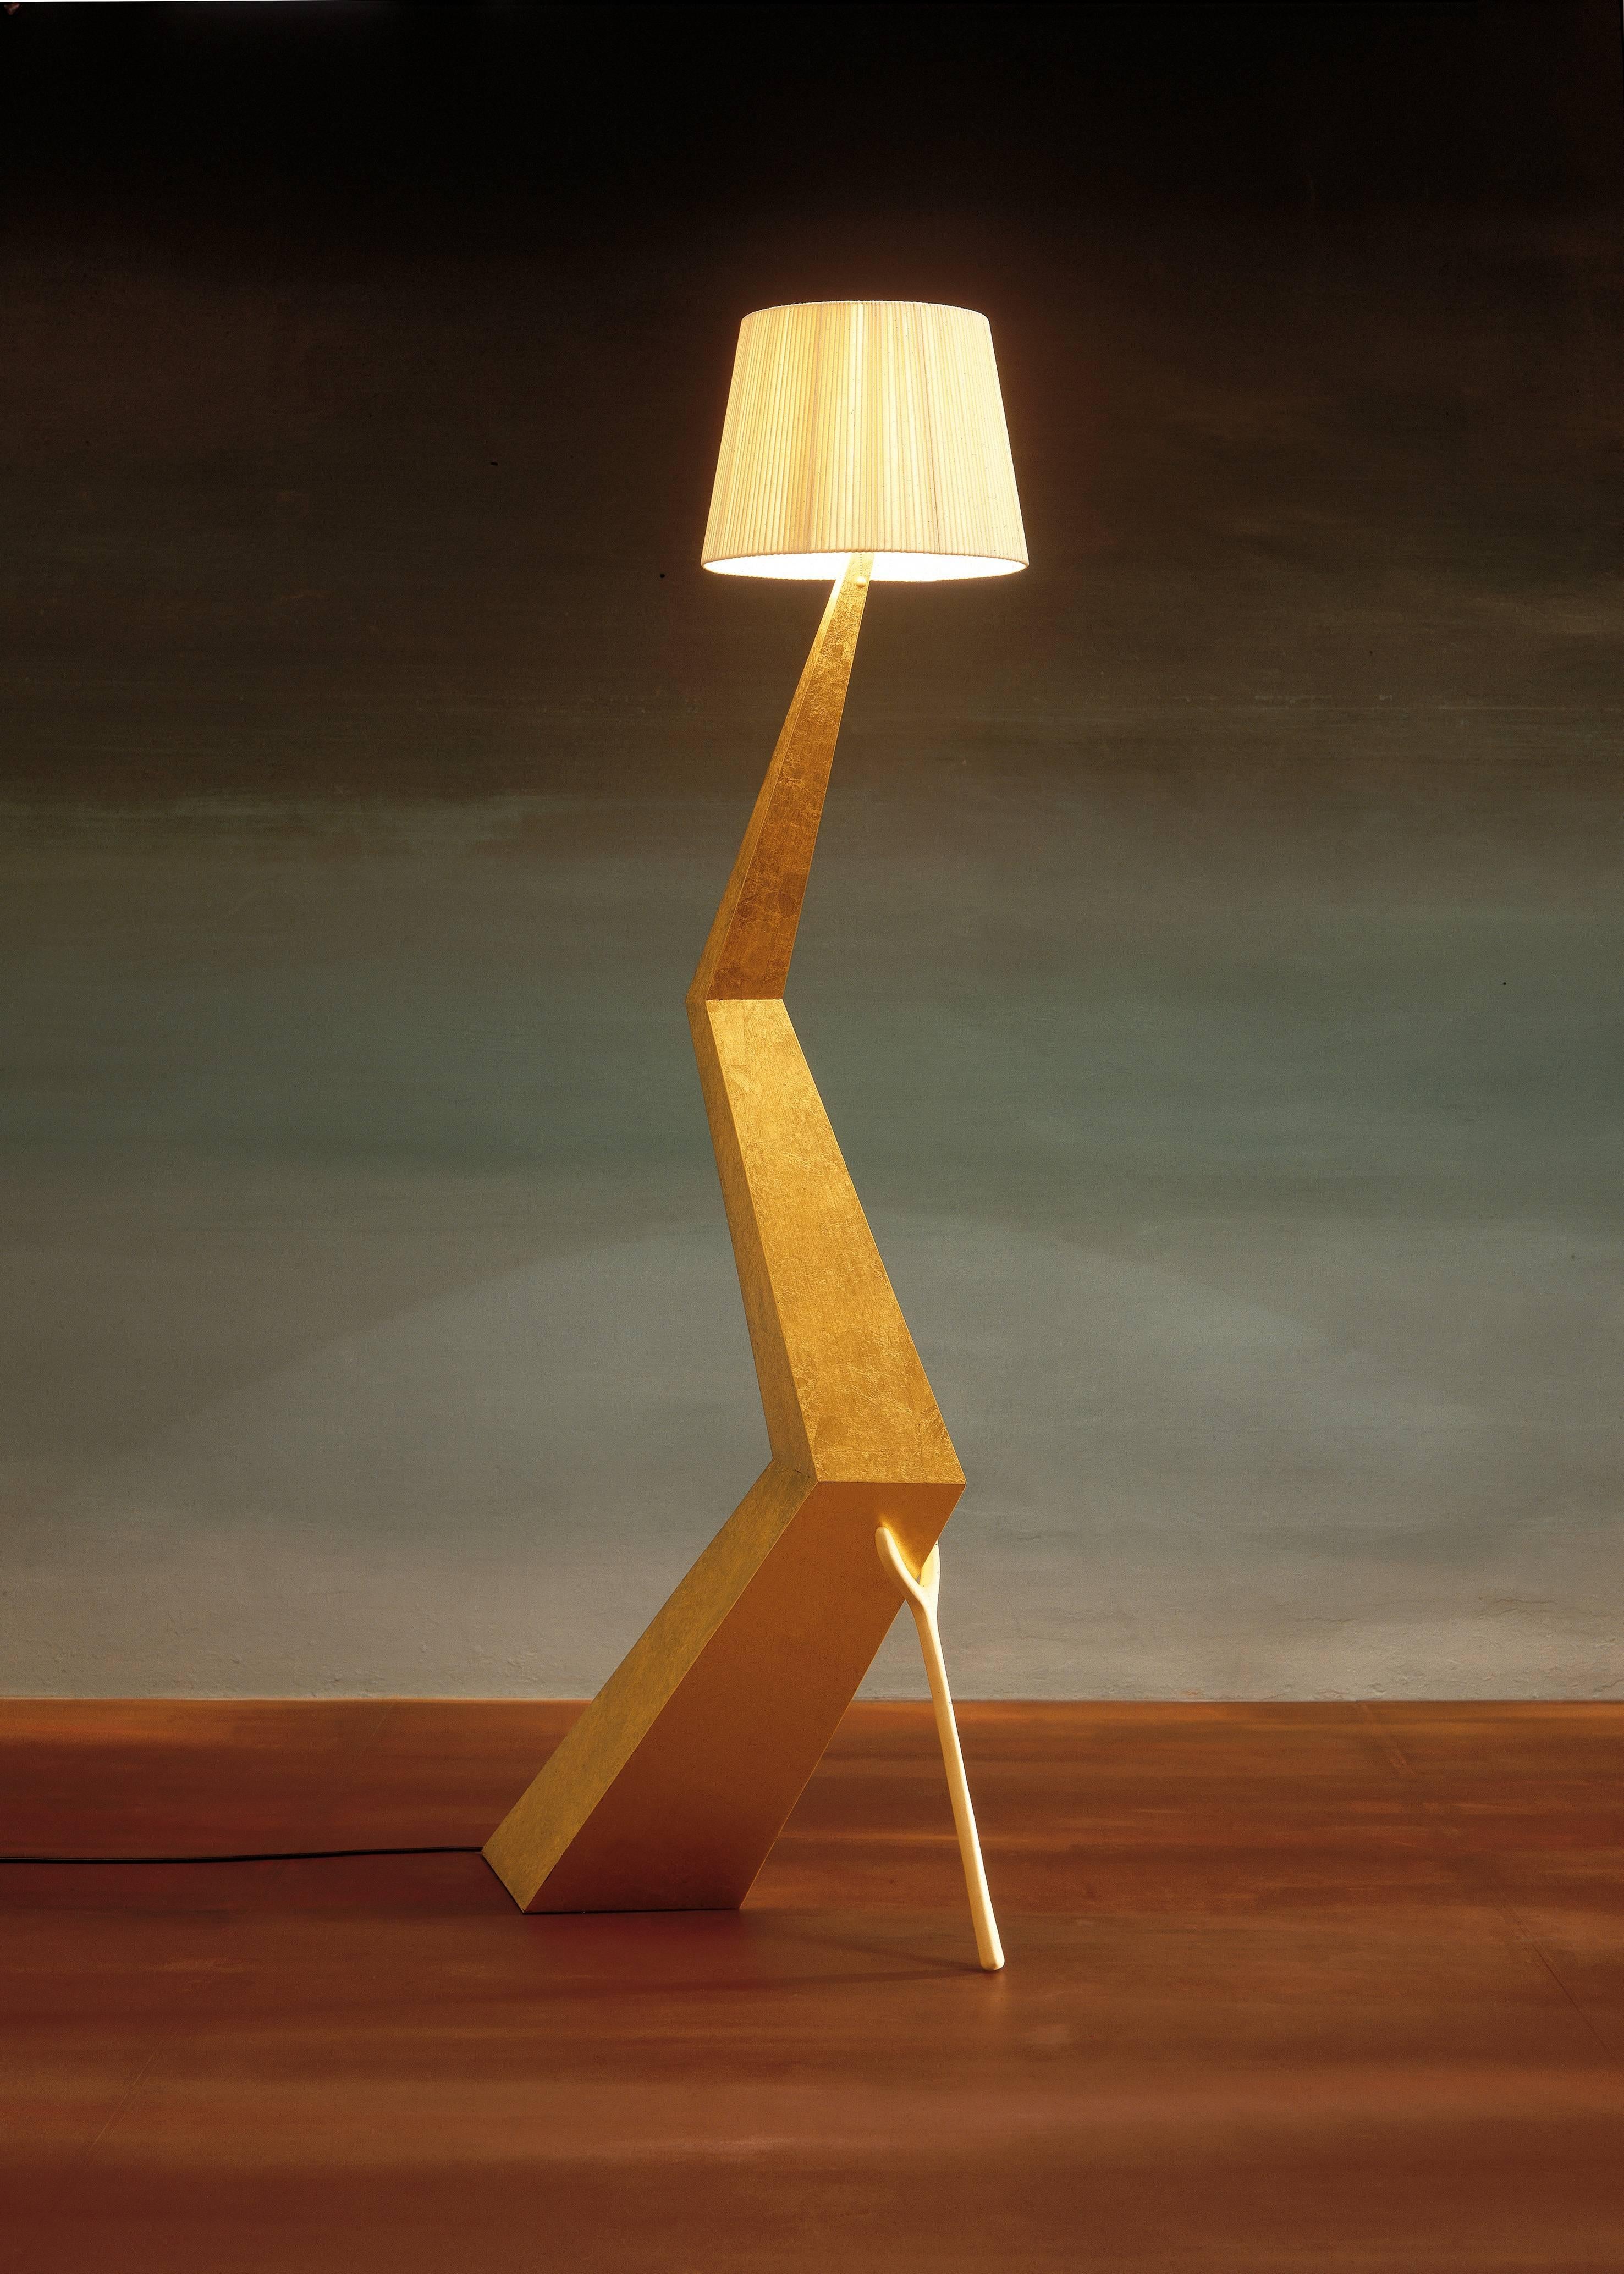 Braceli lamp designed by Salvador Dali manufactured by BD furniture in Barcelona.

Bracelli
panel structure covered with silver plated polyester painting (Fine gold leaf).
Lampshade in ivory cotton and rayon. 

Measures: 37 x 64 x 180 H.